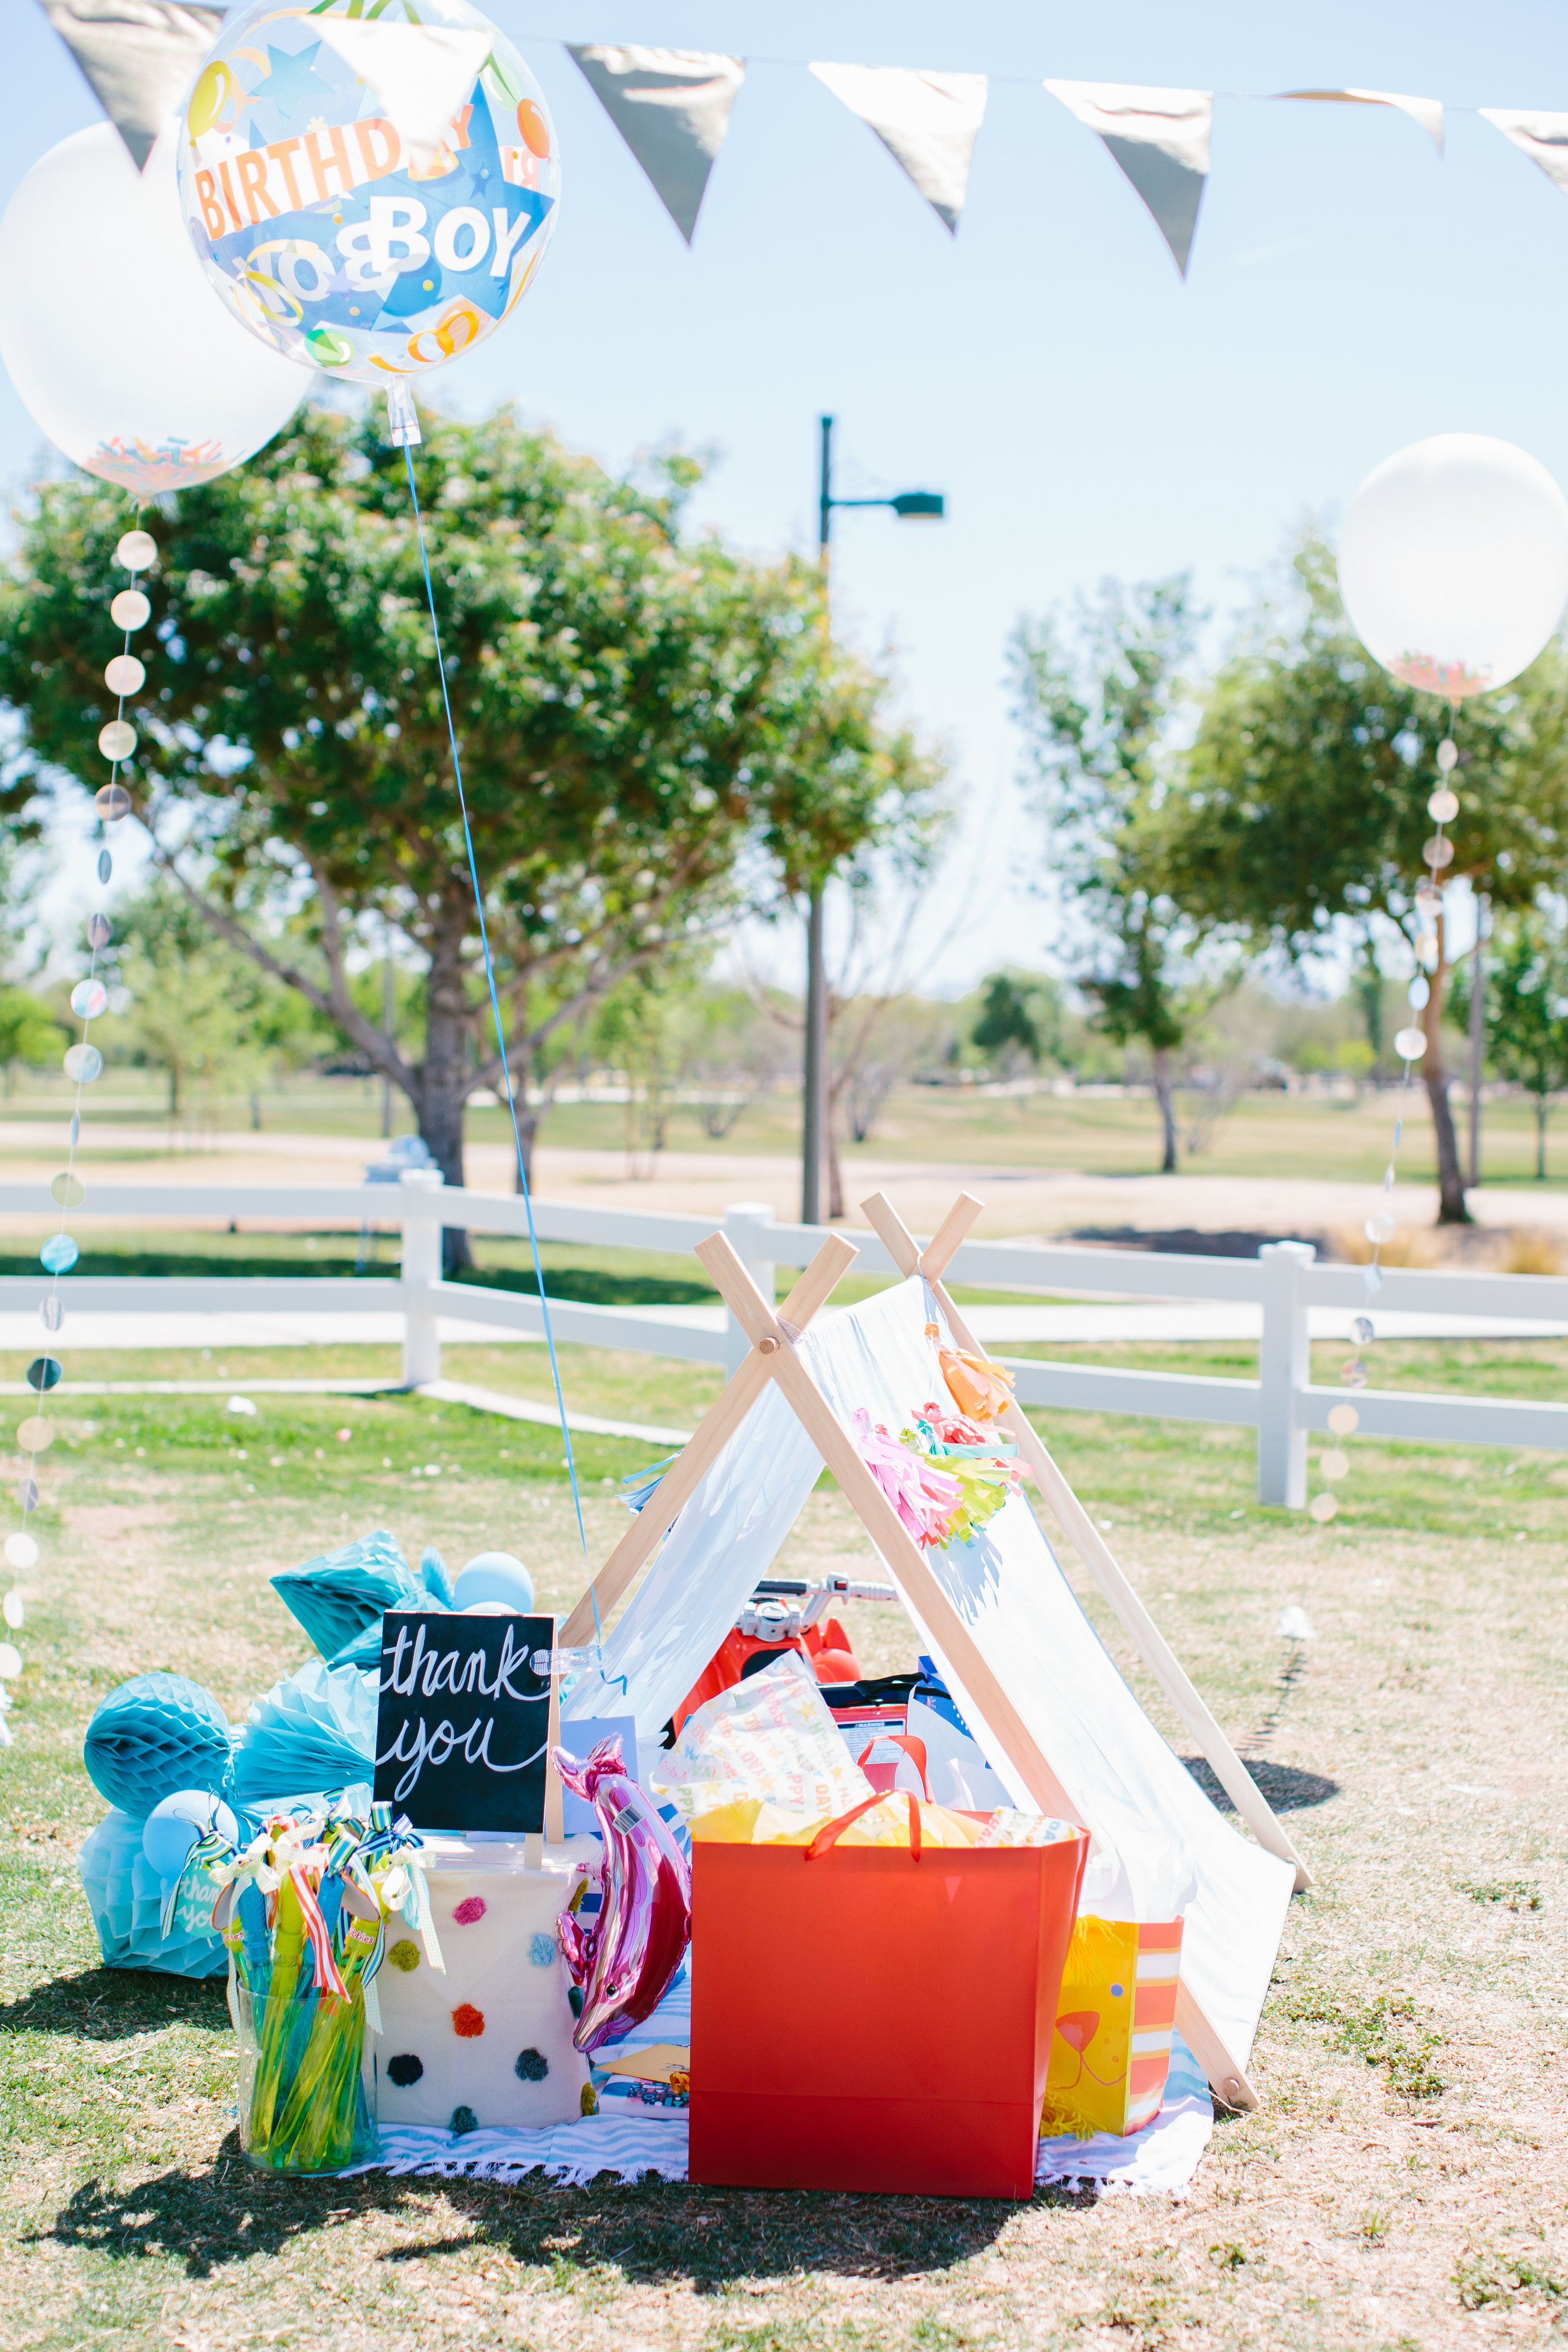 A First Birthday Party Picnic in the Park - Project Nursery